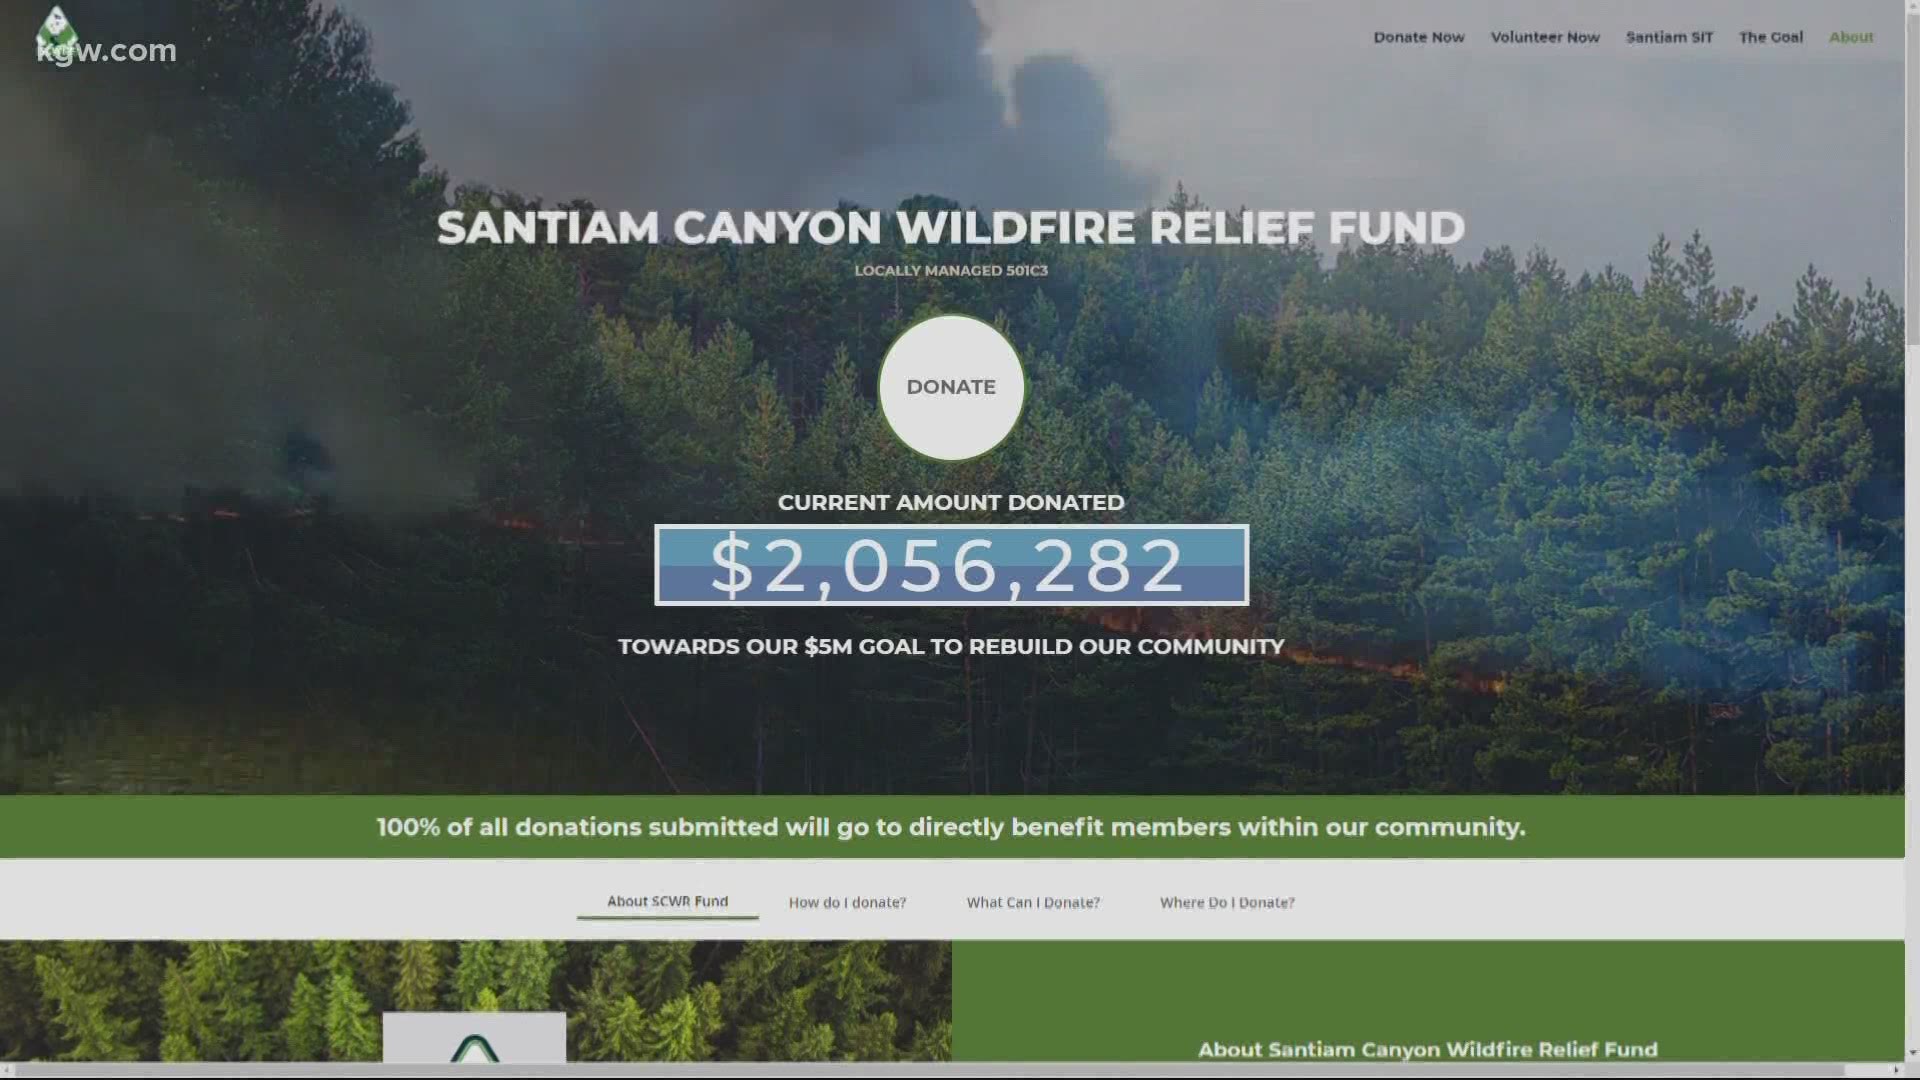 It’s been about a month-and-a-half since wildfires tore through communities in the Santiam Canyon. People there started a fund to help and donations have poured in.